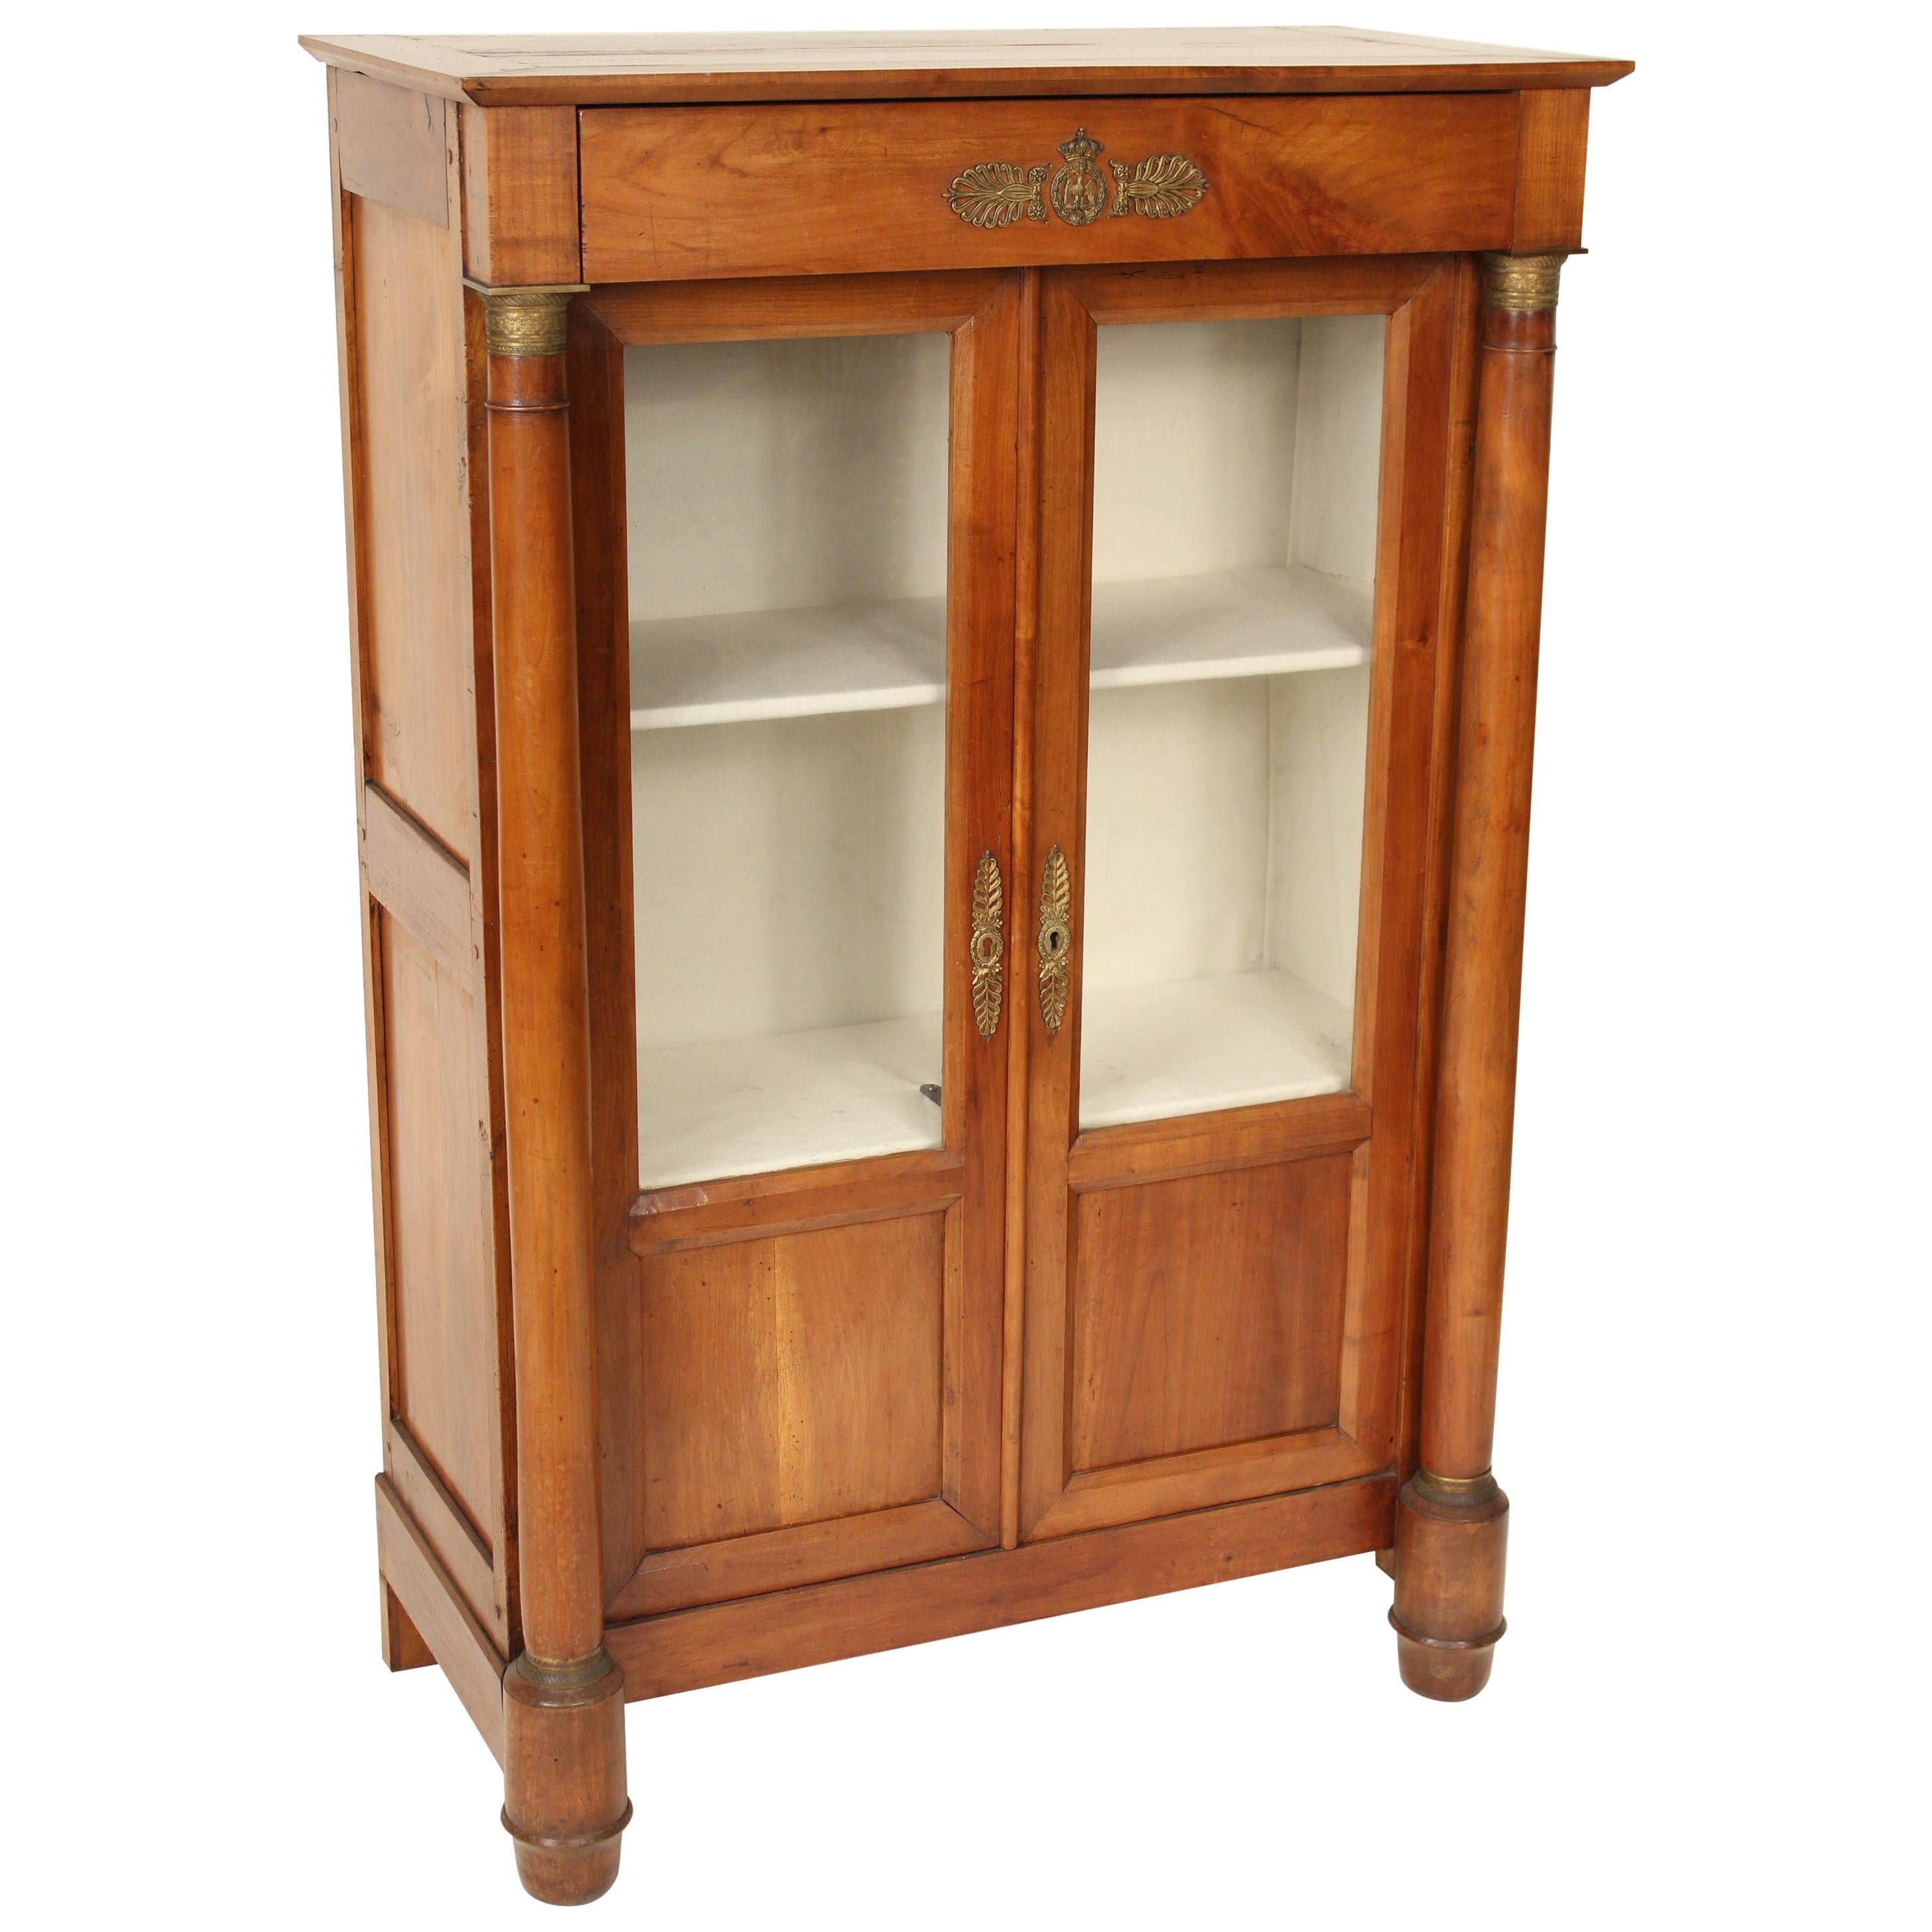 Antique Empire Style Bookcase/ Display Cabinet